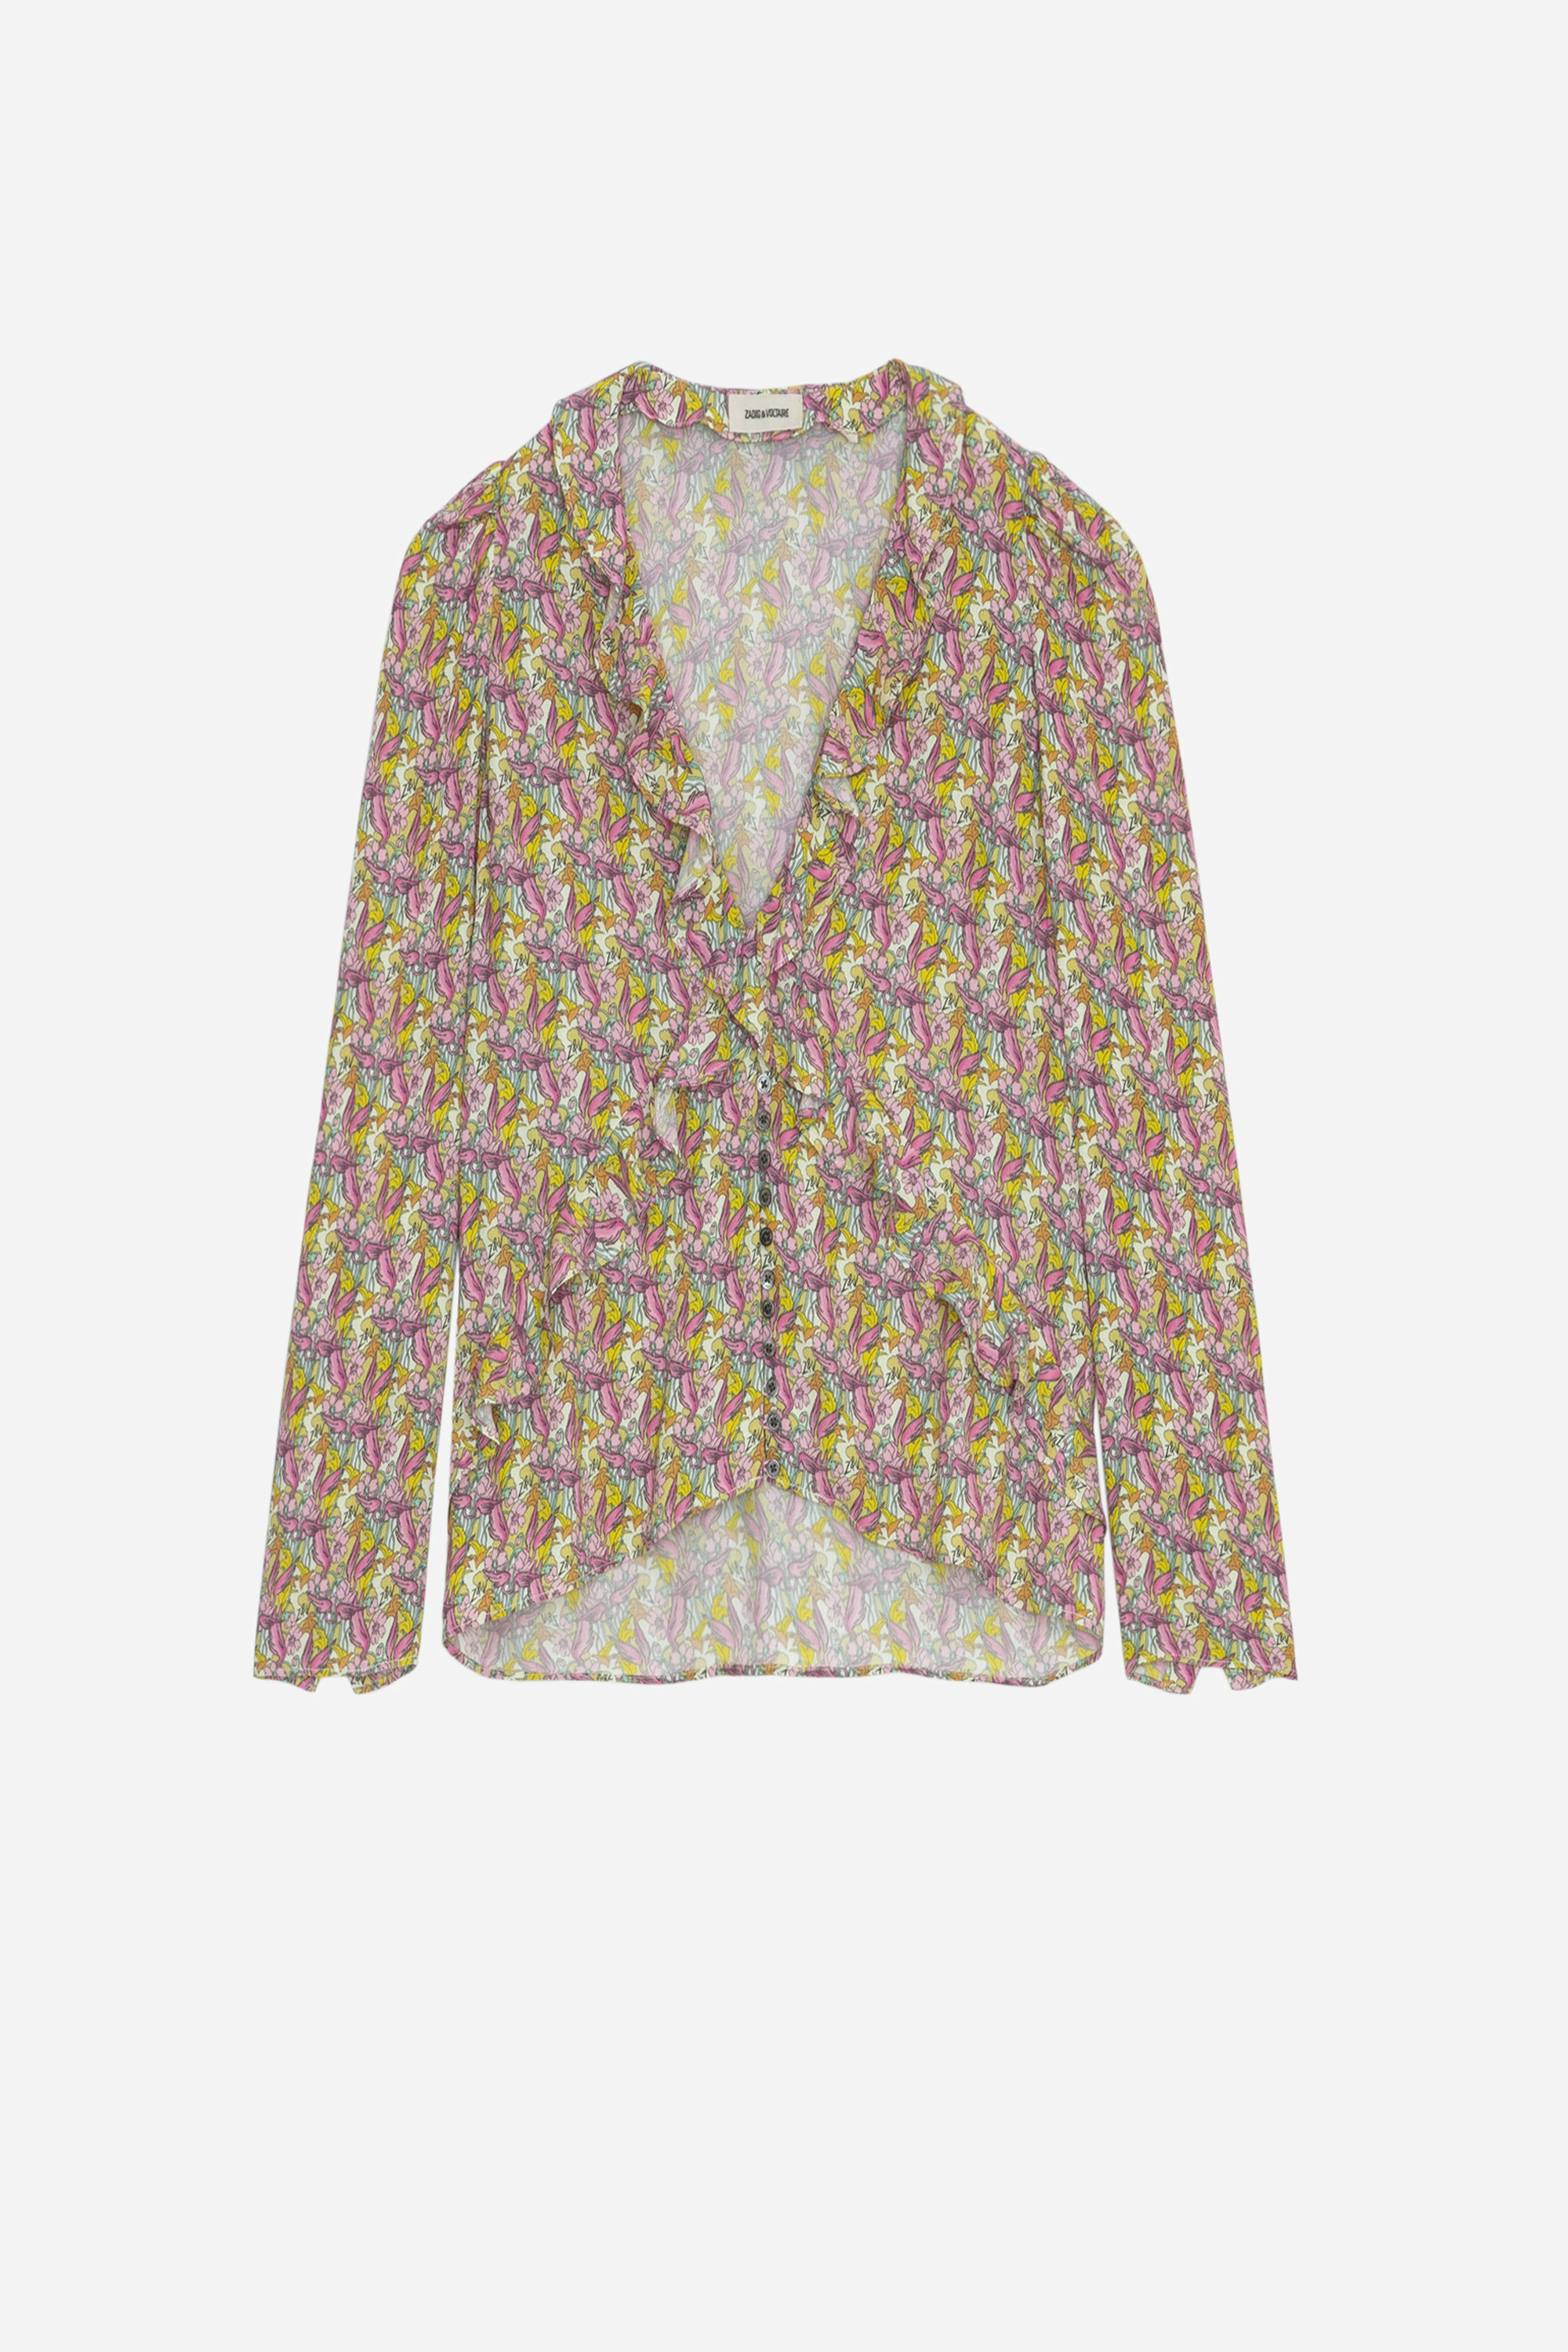 Tresse Blouse Women's asymmetric yellow crepe blouse featuring liberty print, wings and ruffle details.